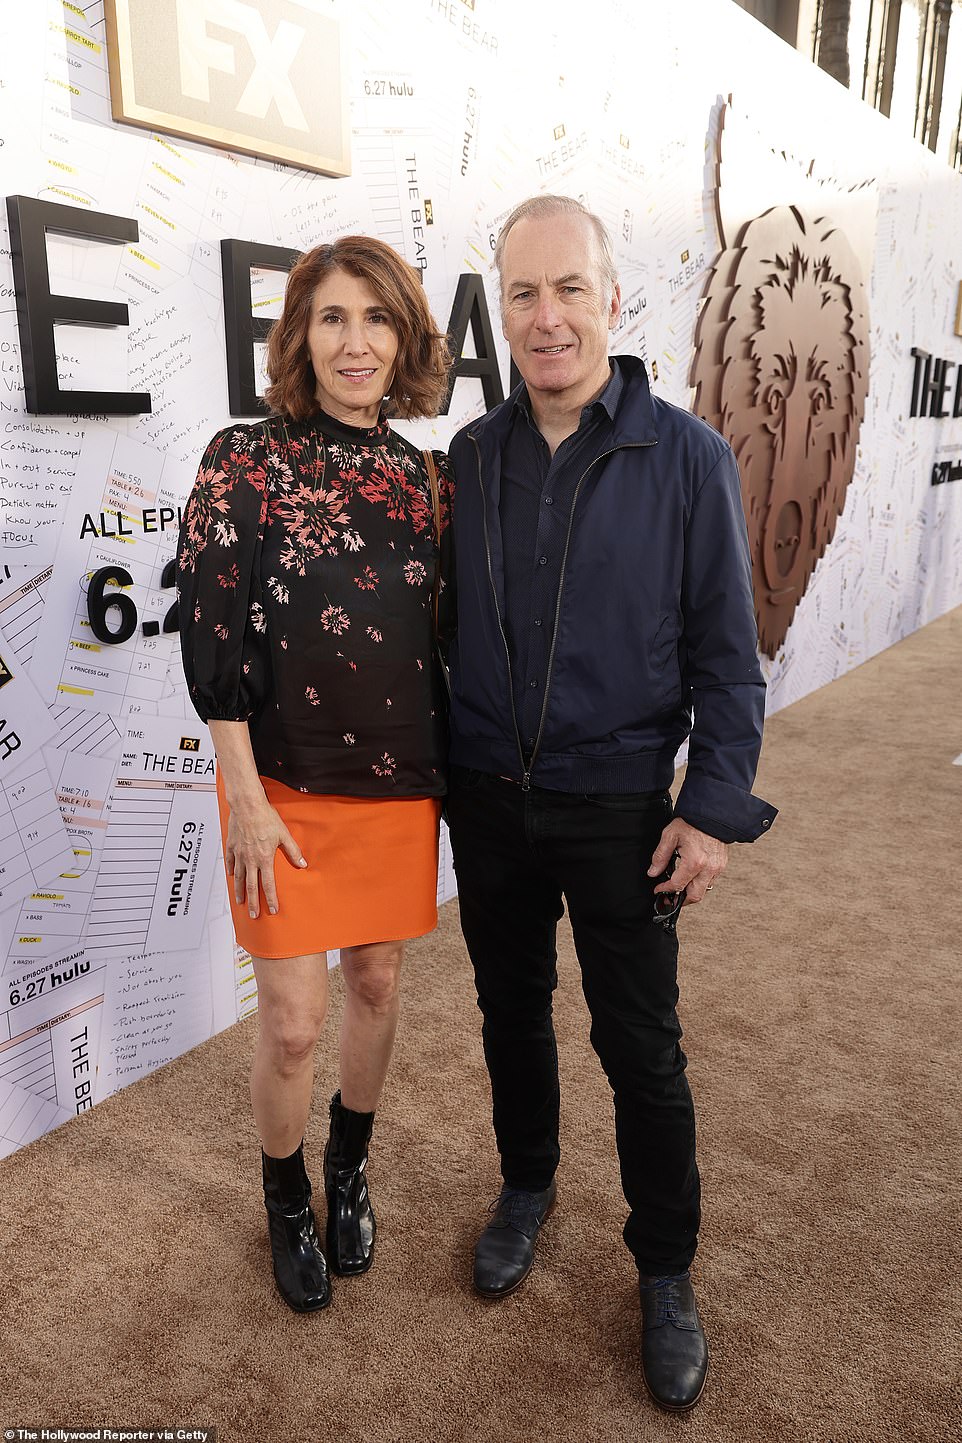 The acclaimed actor, 61, brought his longtime wife Naomi Odenkirk as his plus one